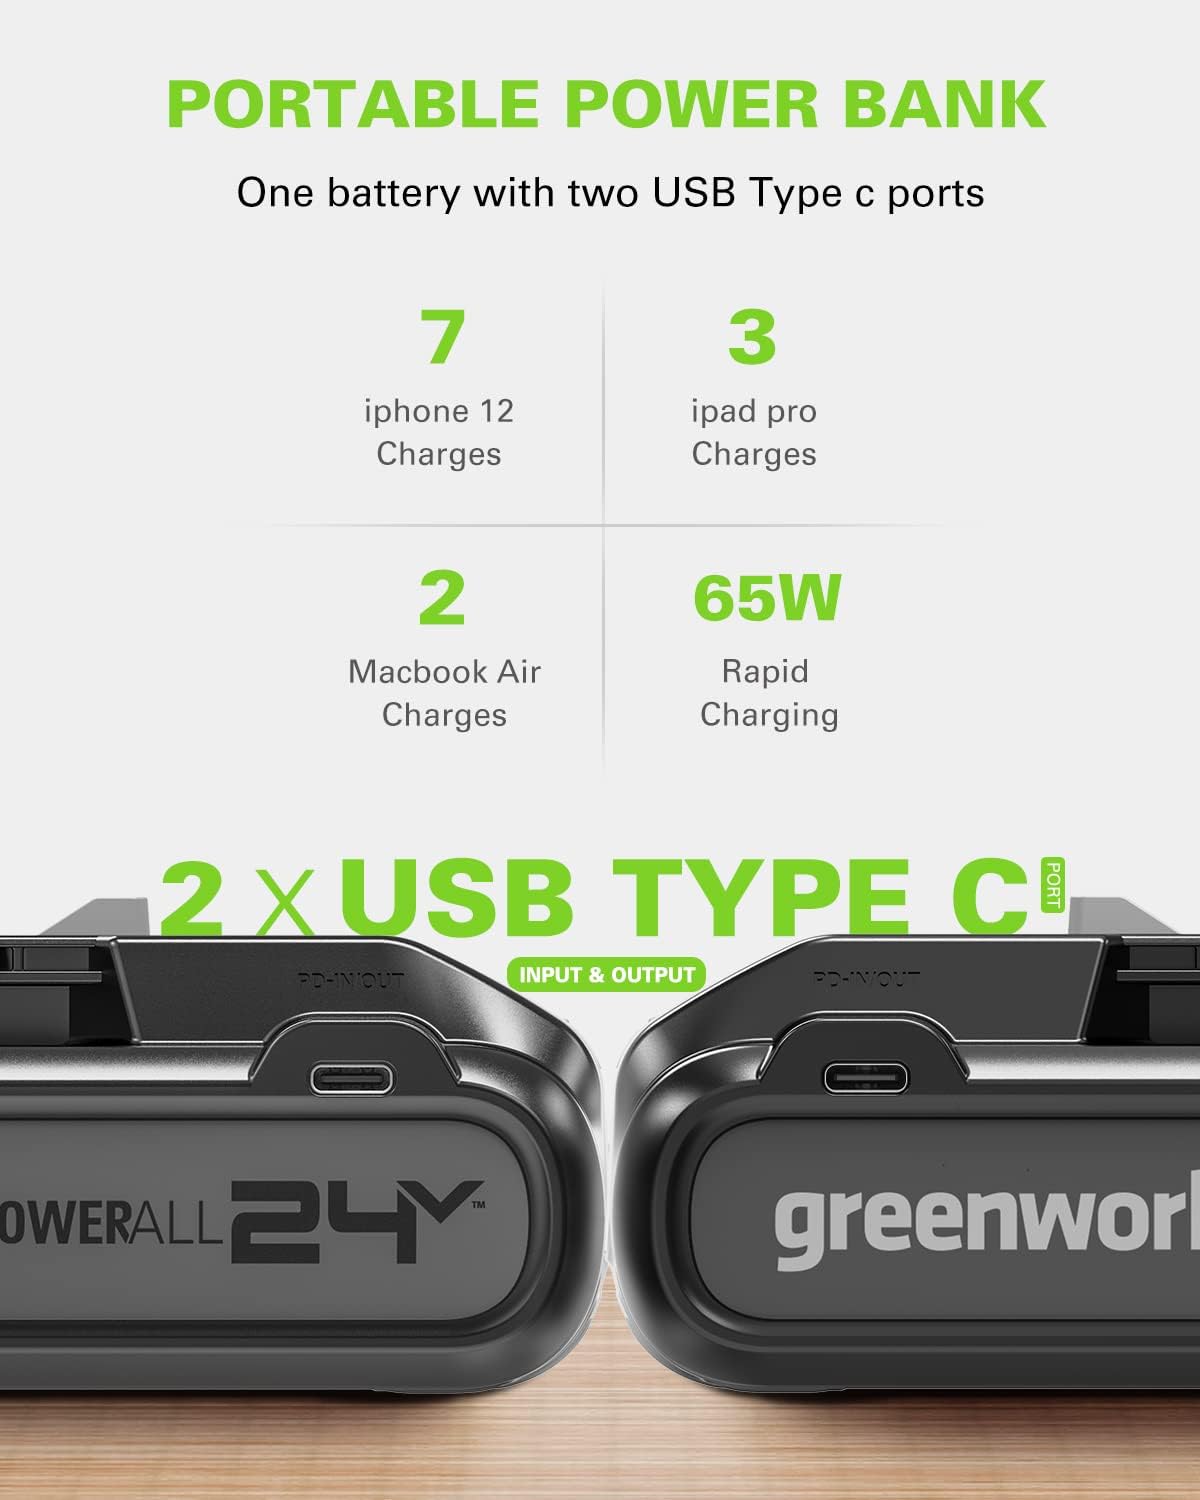 Greenworks 24V 4.0Ah (High Capacity) Lithium-Ion Battery \/ 125+ Compatible Tools